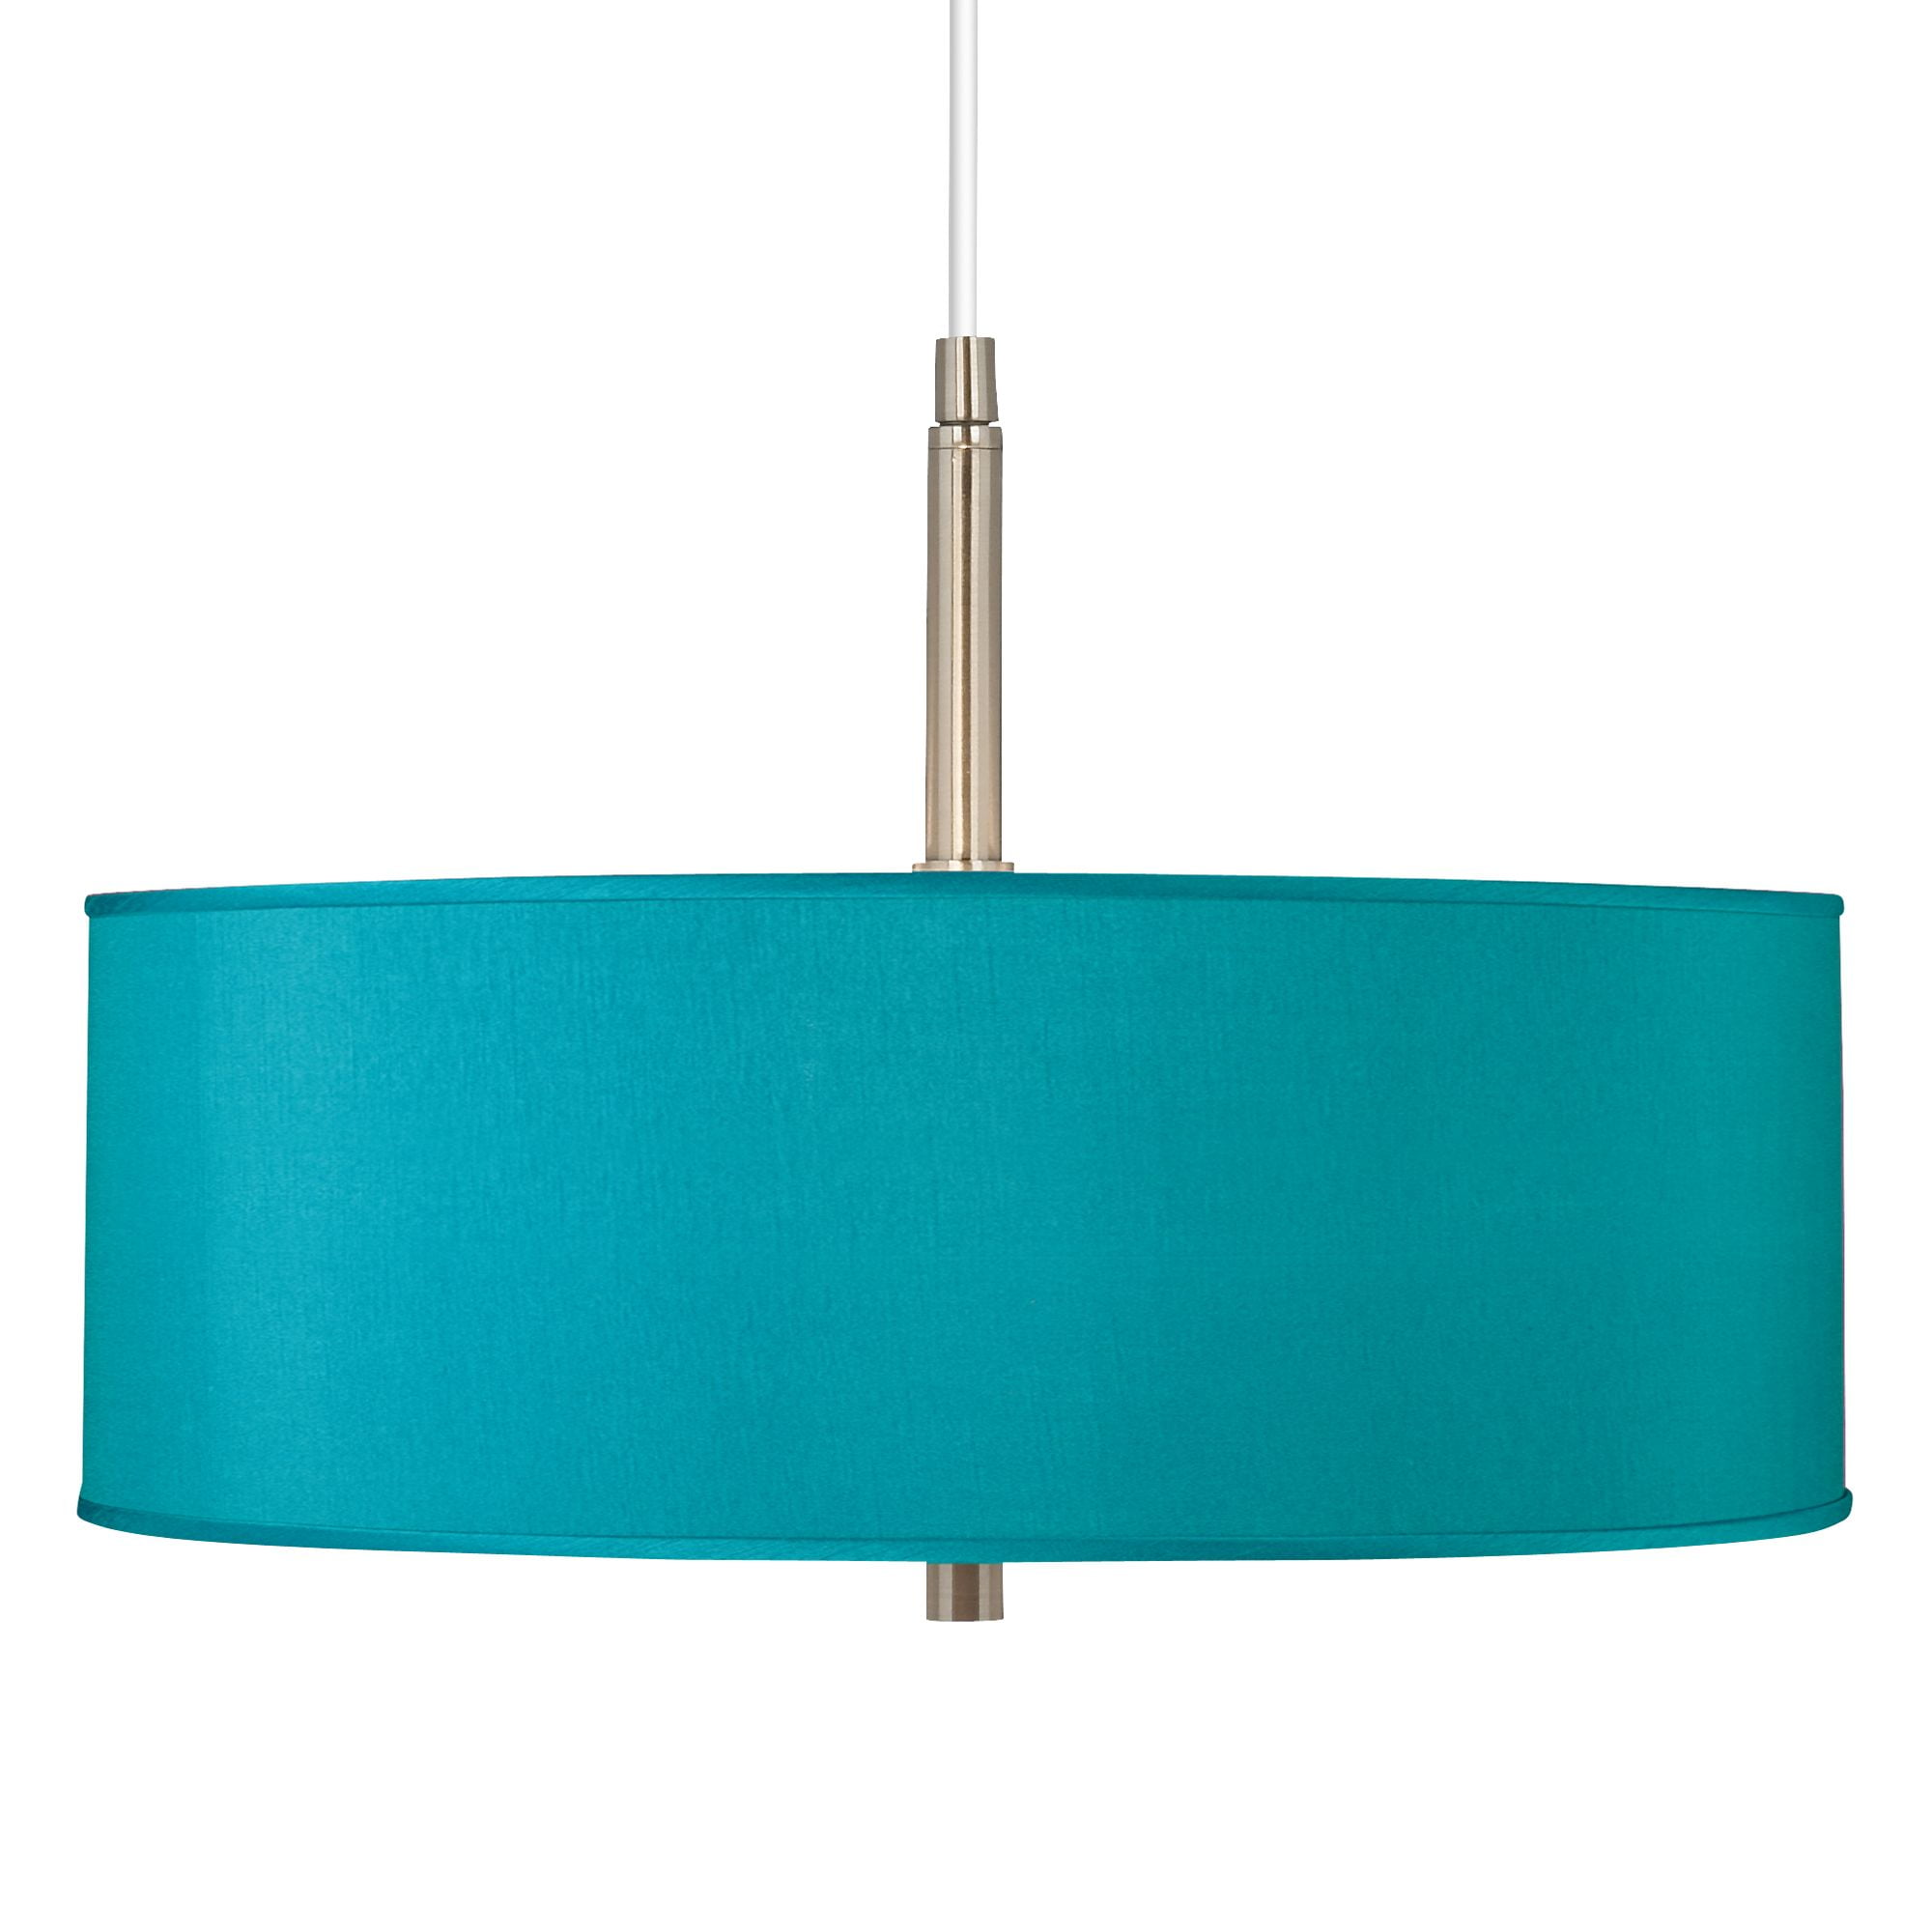 Brushed Nickel Drum Pendant Chandelier 16 Wide Modern Contemporary Teal Blue Faux Silk Shade 3-Light Fixture for Dining Room House Kitchen Bedroom Living Room High Ceilings Possini Euro Design